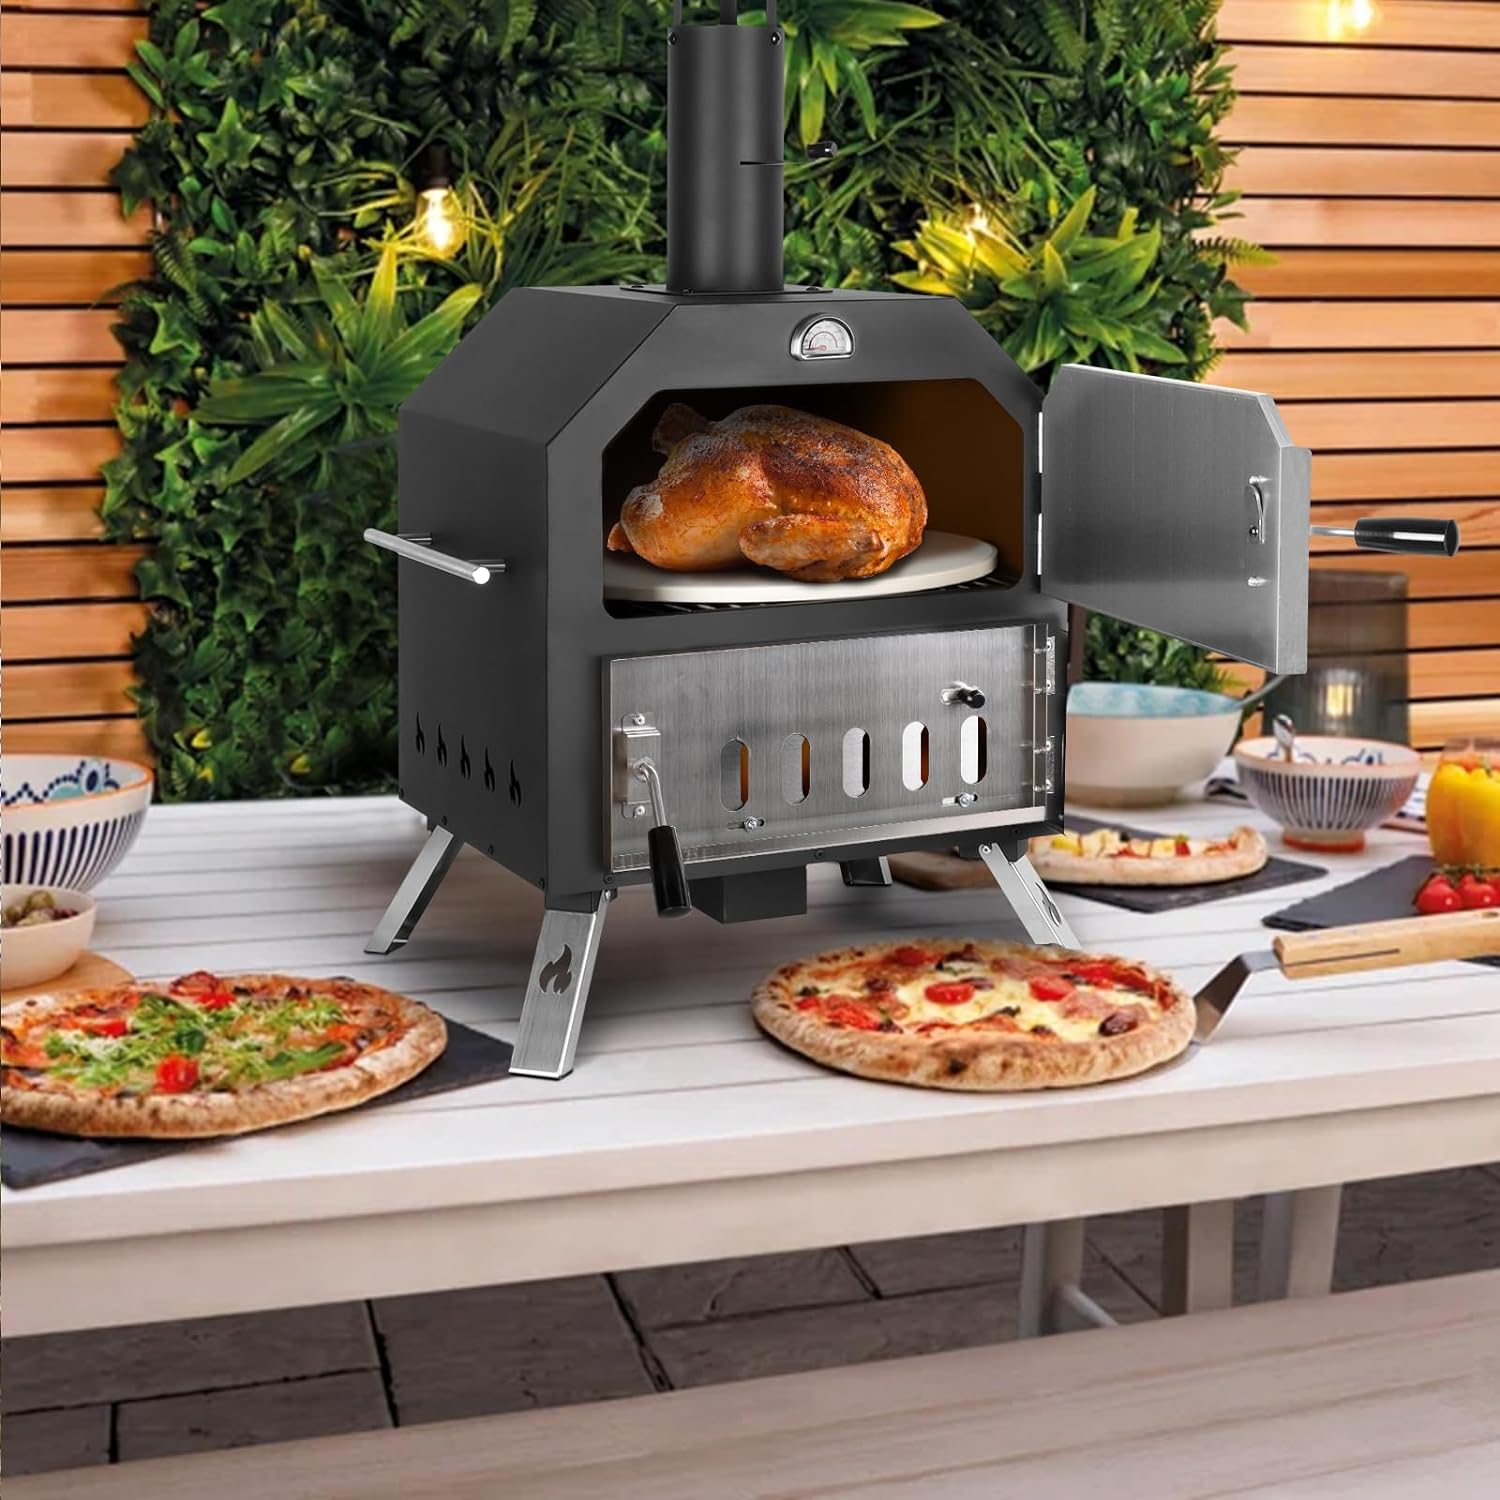 

12in Outdoor Pizza Oven Pizza Oven Portable Patio Ovens Included Pizza Stone, Pizza Peel, Fold-up Legs, Cover Cooking Rack For Camping Backyard Bbq